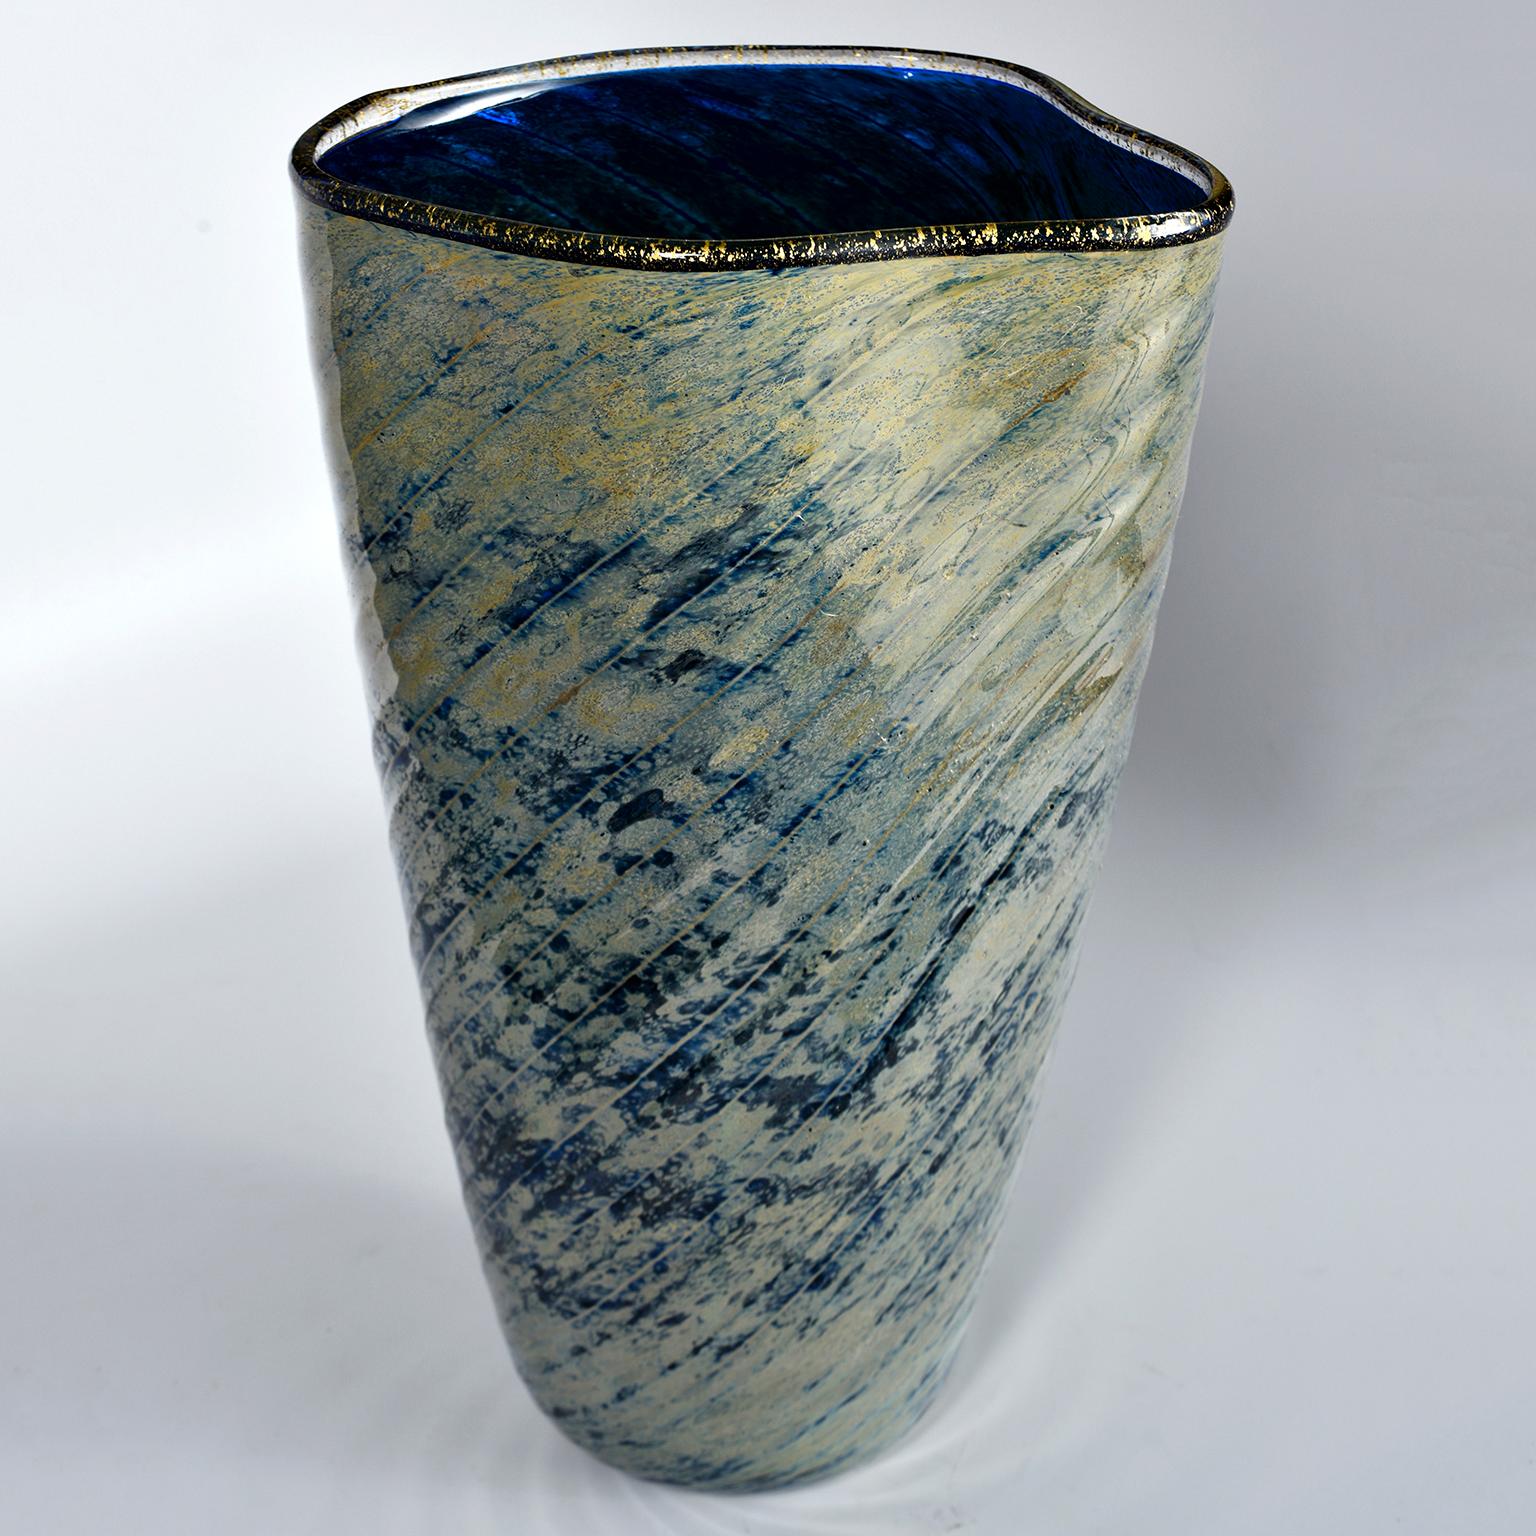 Tall art glass vase has a saturated cobalt interior with black, gold-infused lip and striated blue and gold outer surface. Dates from the 1990s. Unknown maker. Another piece by same artist in taller form with similar colors/style is available at the